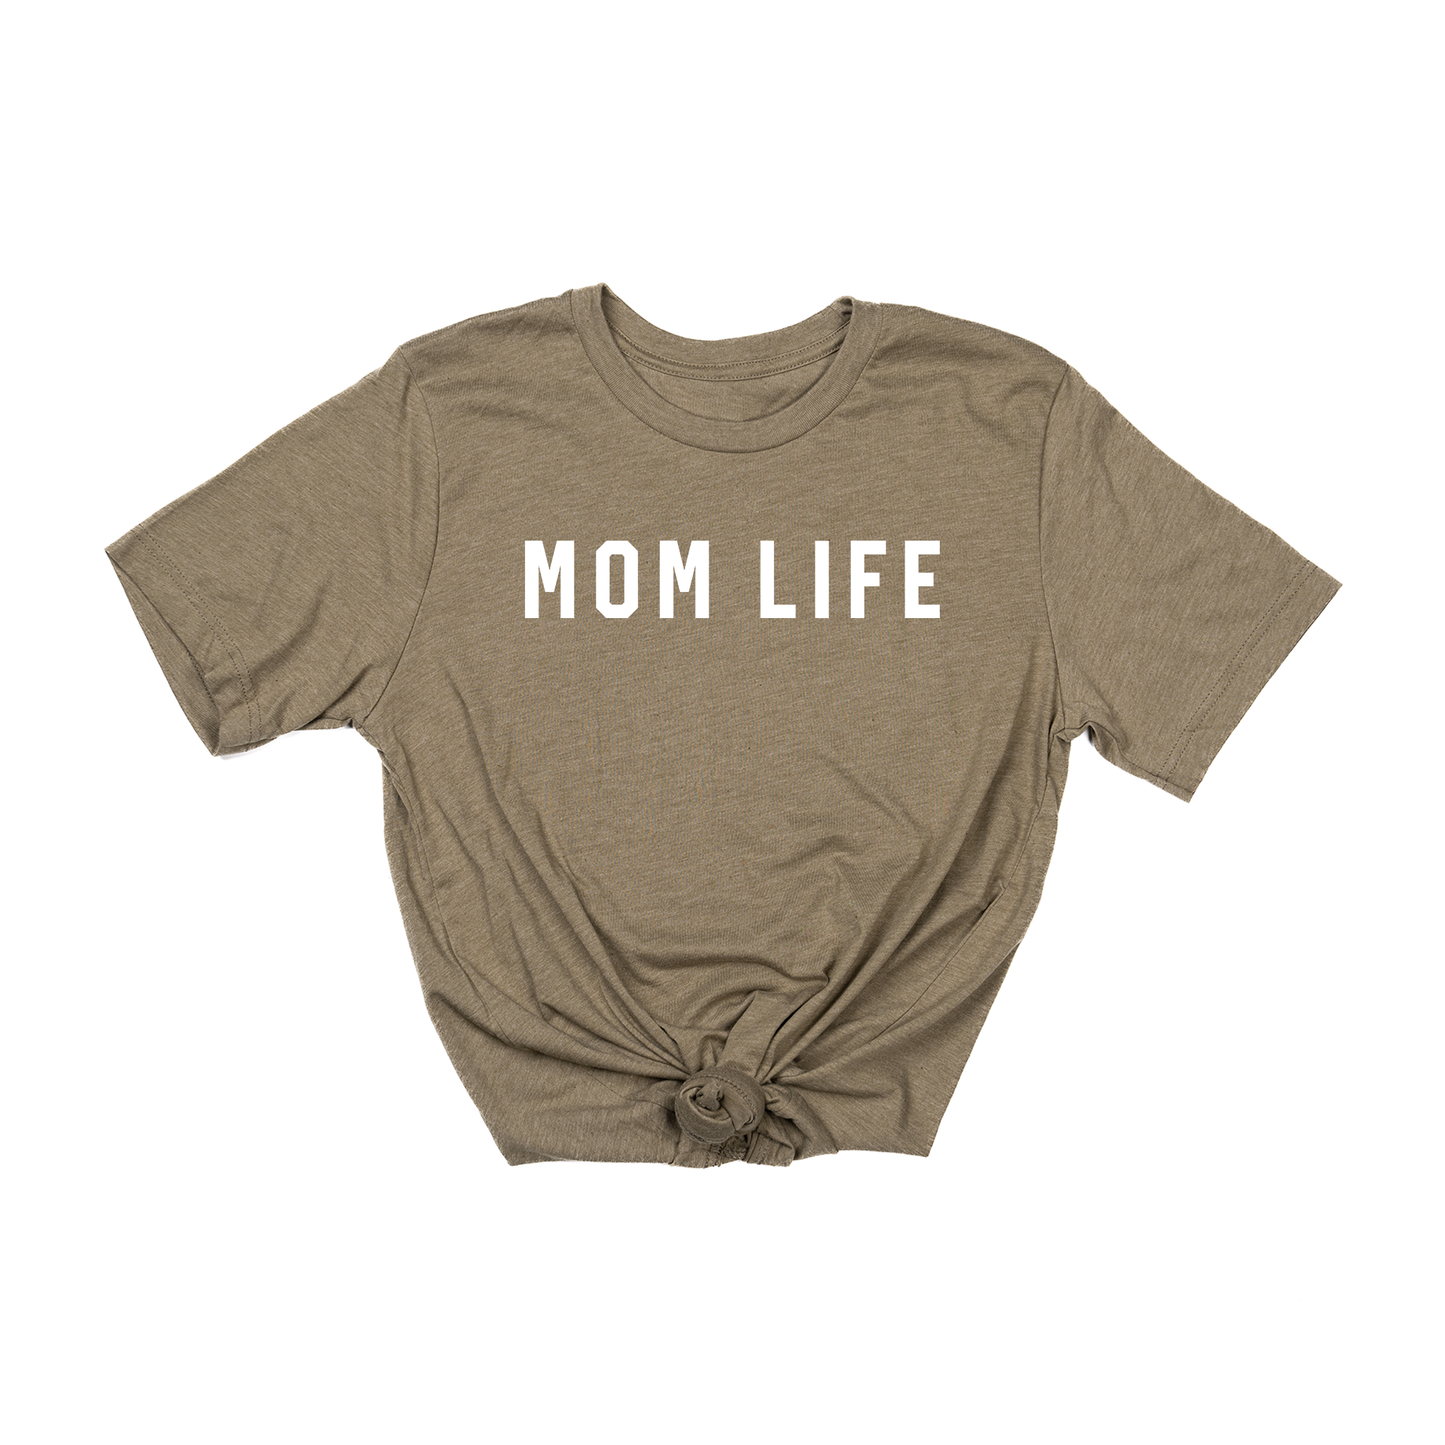 Mom Life (Across Front, White) - Tee (Olive)